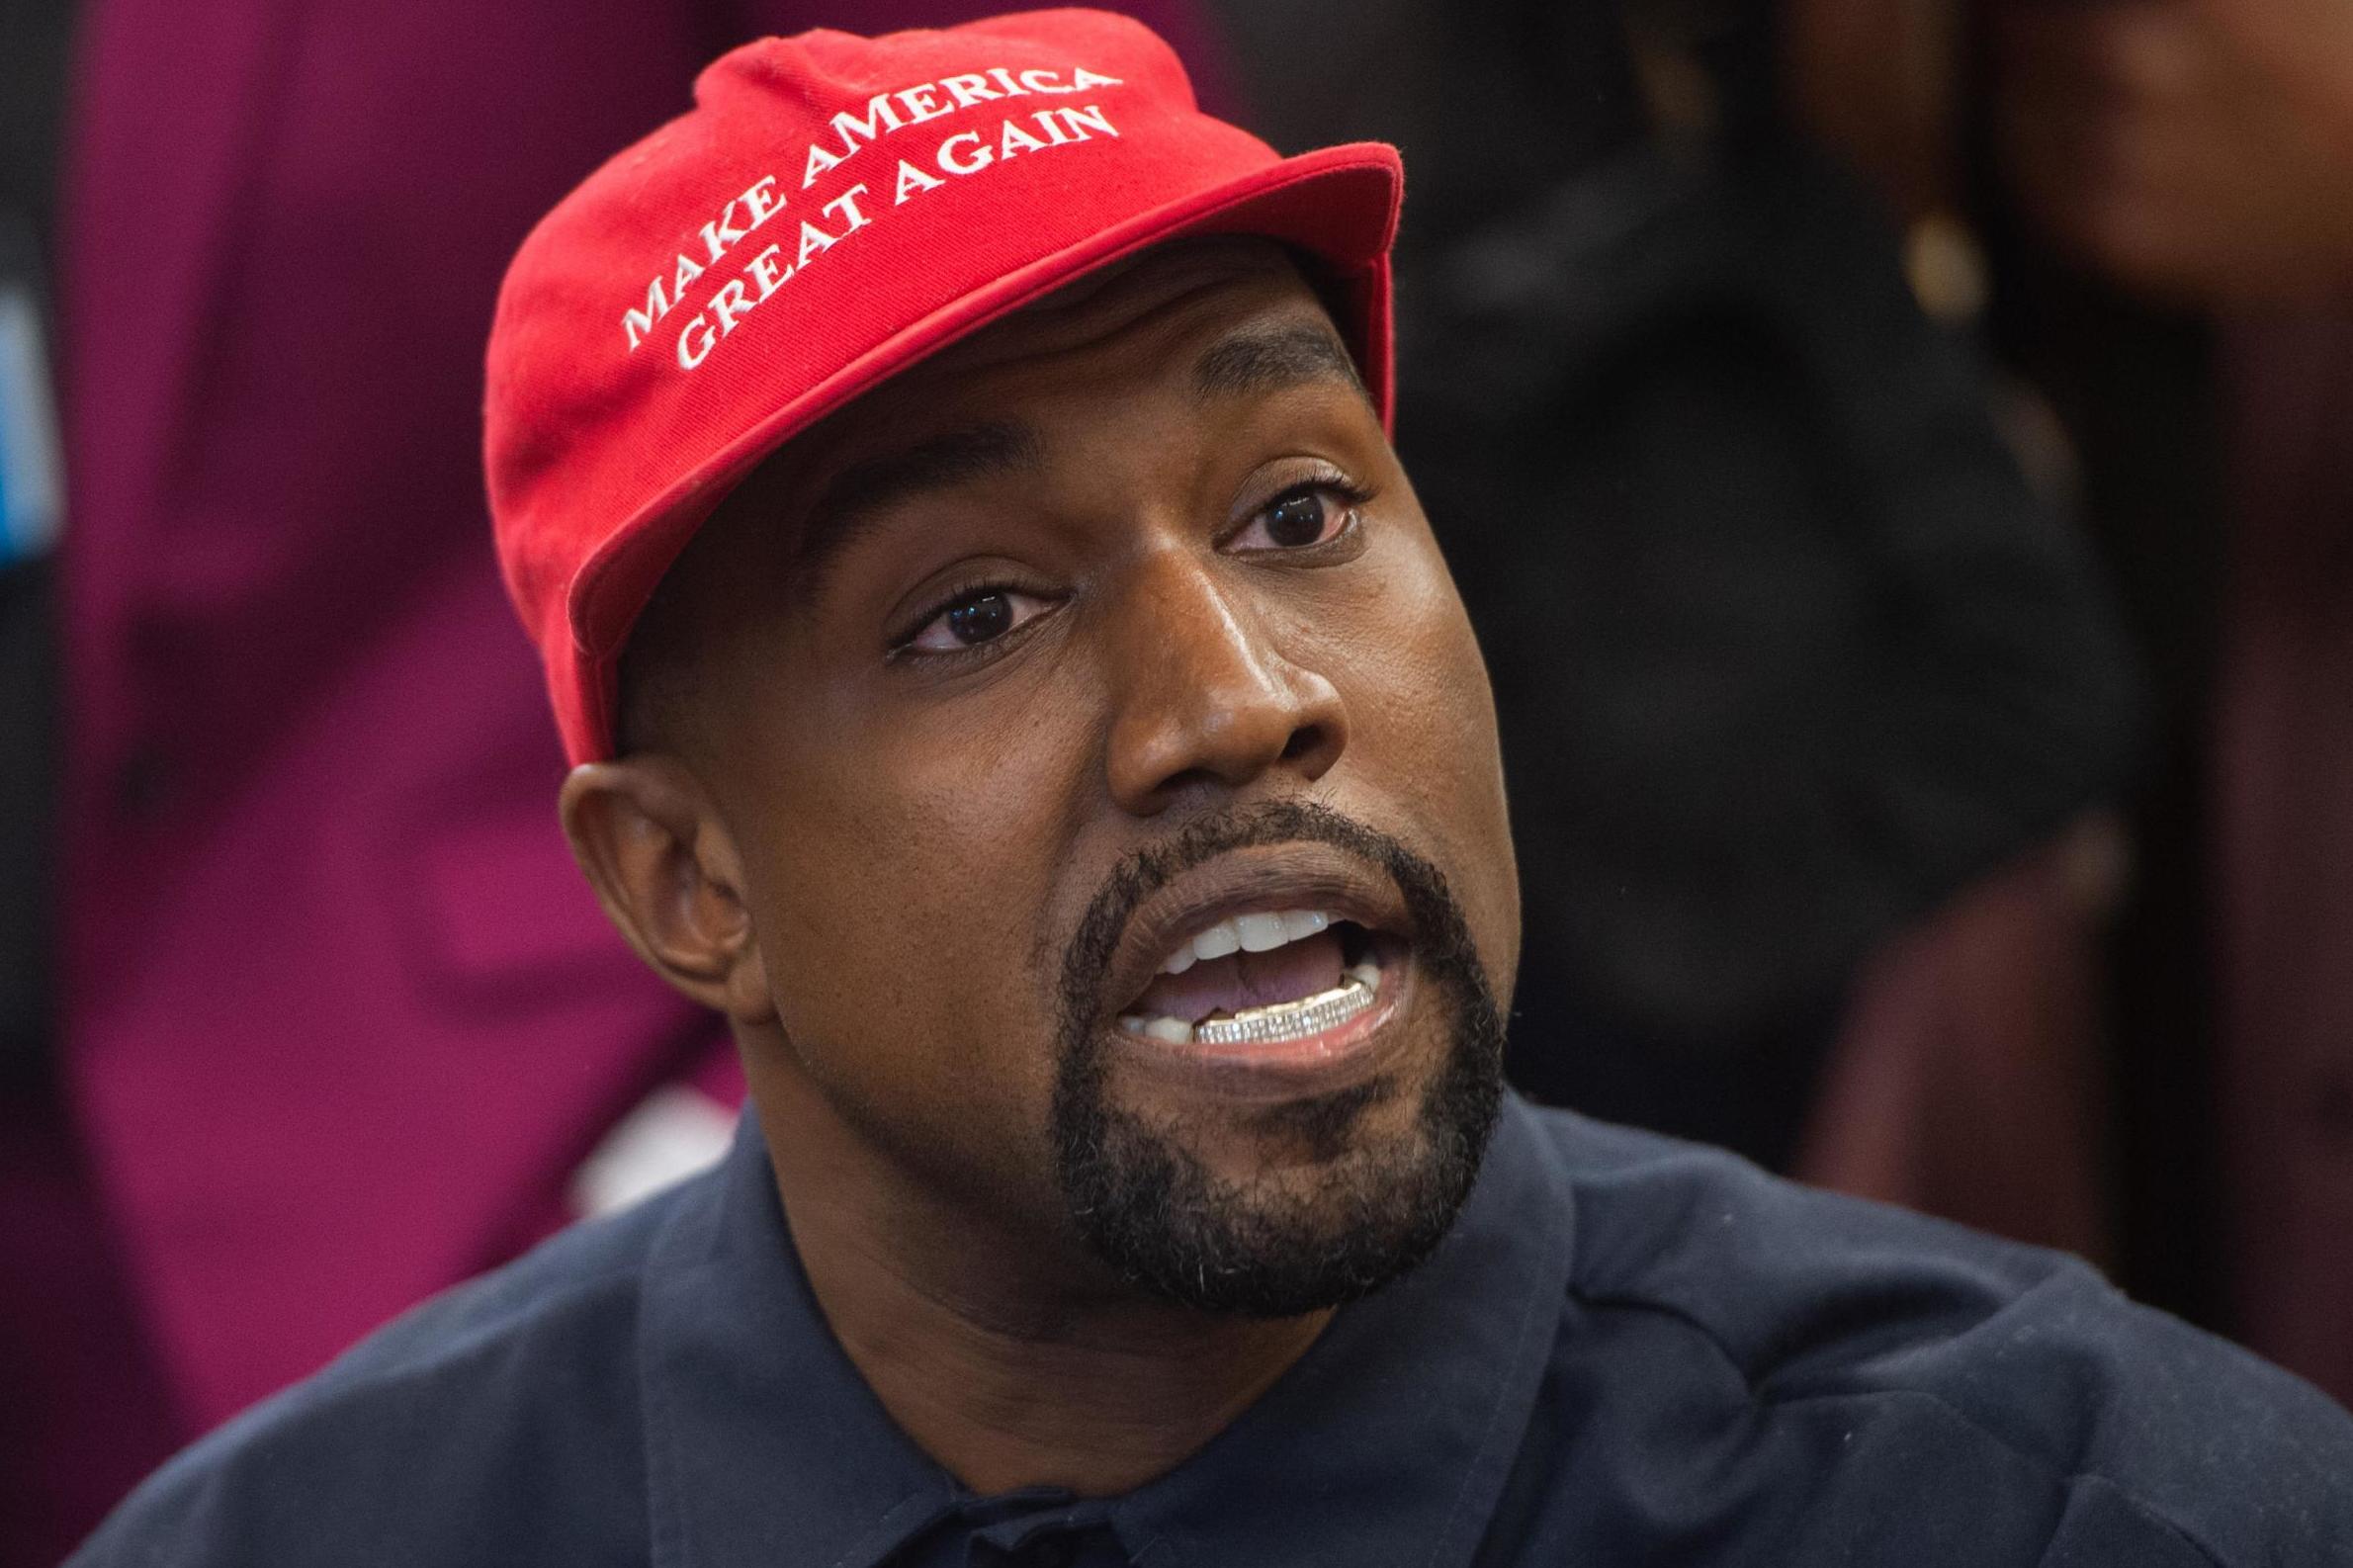 Kanye West during his meeting with Donald Trump in the Oval Office of the White House in Washington, DC, on 11 October, 2018.